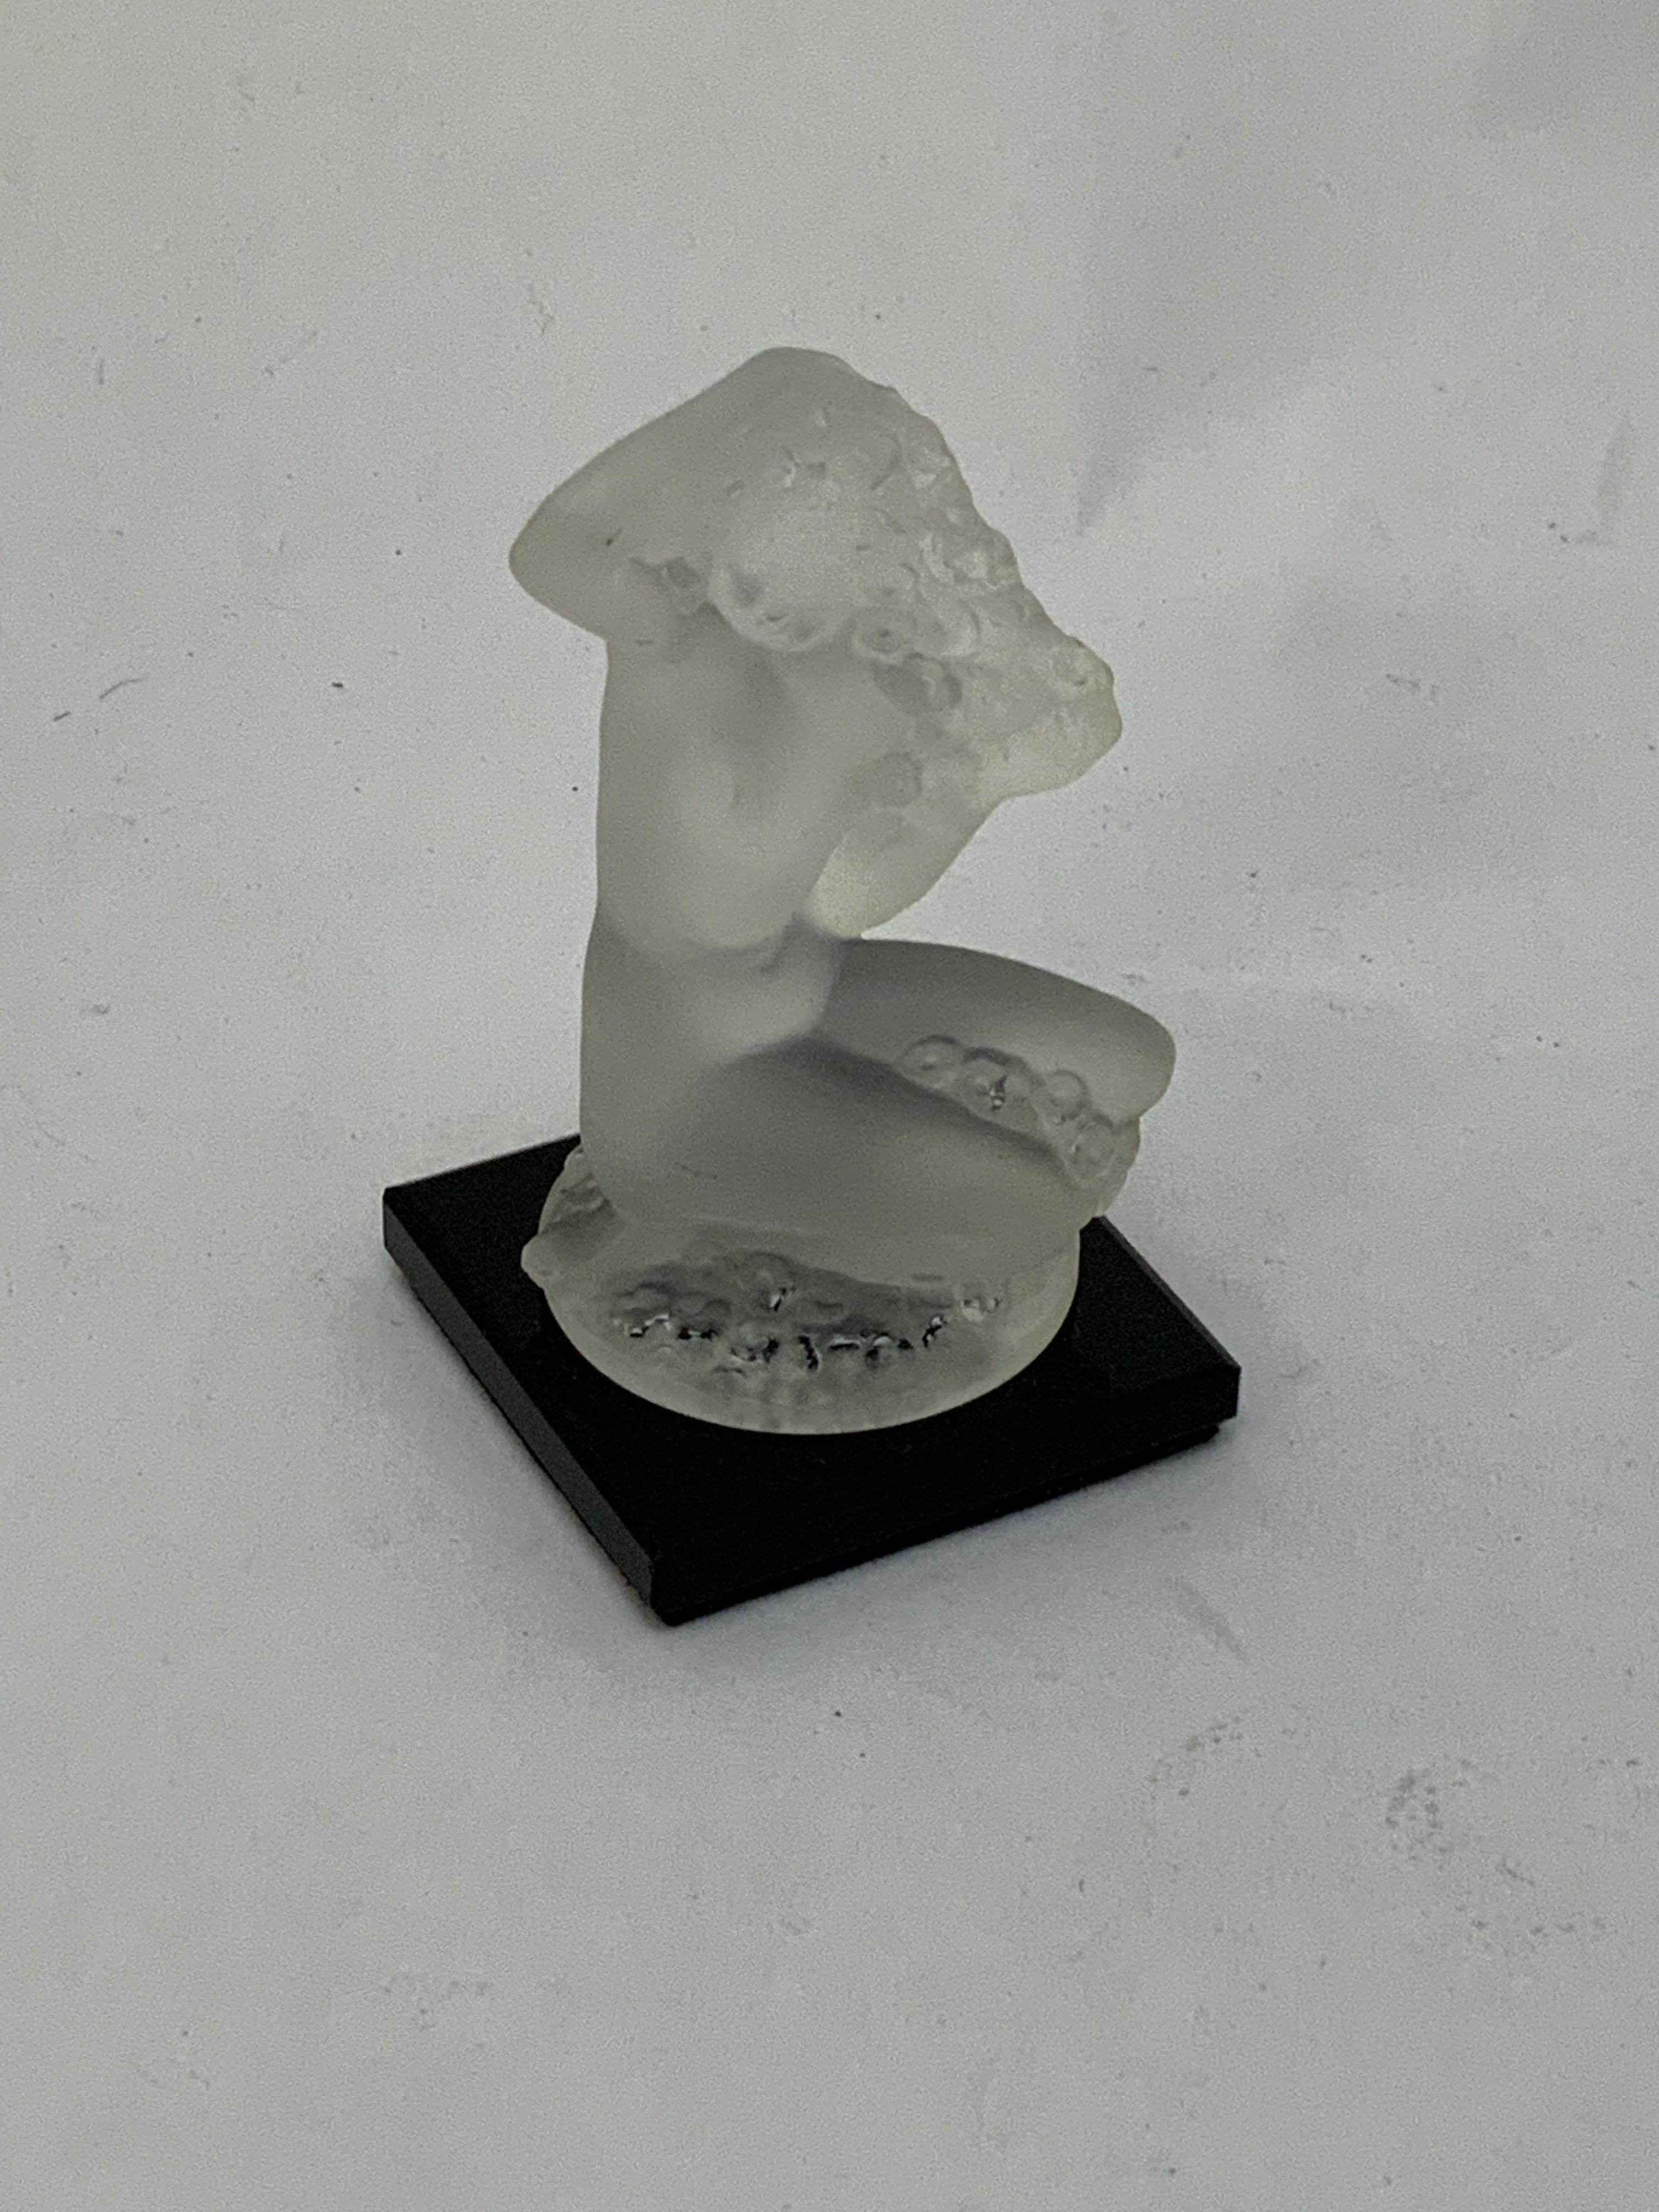 Acid stamped Lalique, France Floreal female nude paperweight. Black glass base, circa 1960-1970. Very good condition.

Base measures 2